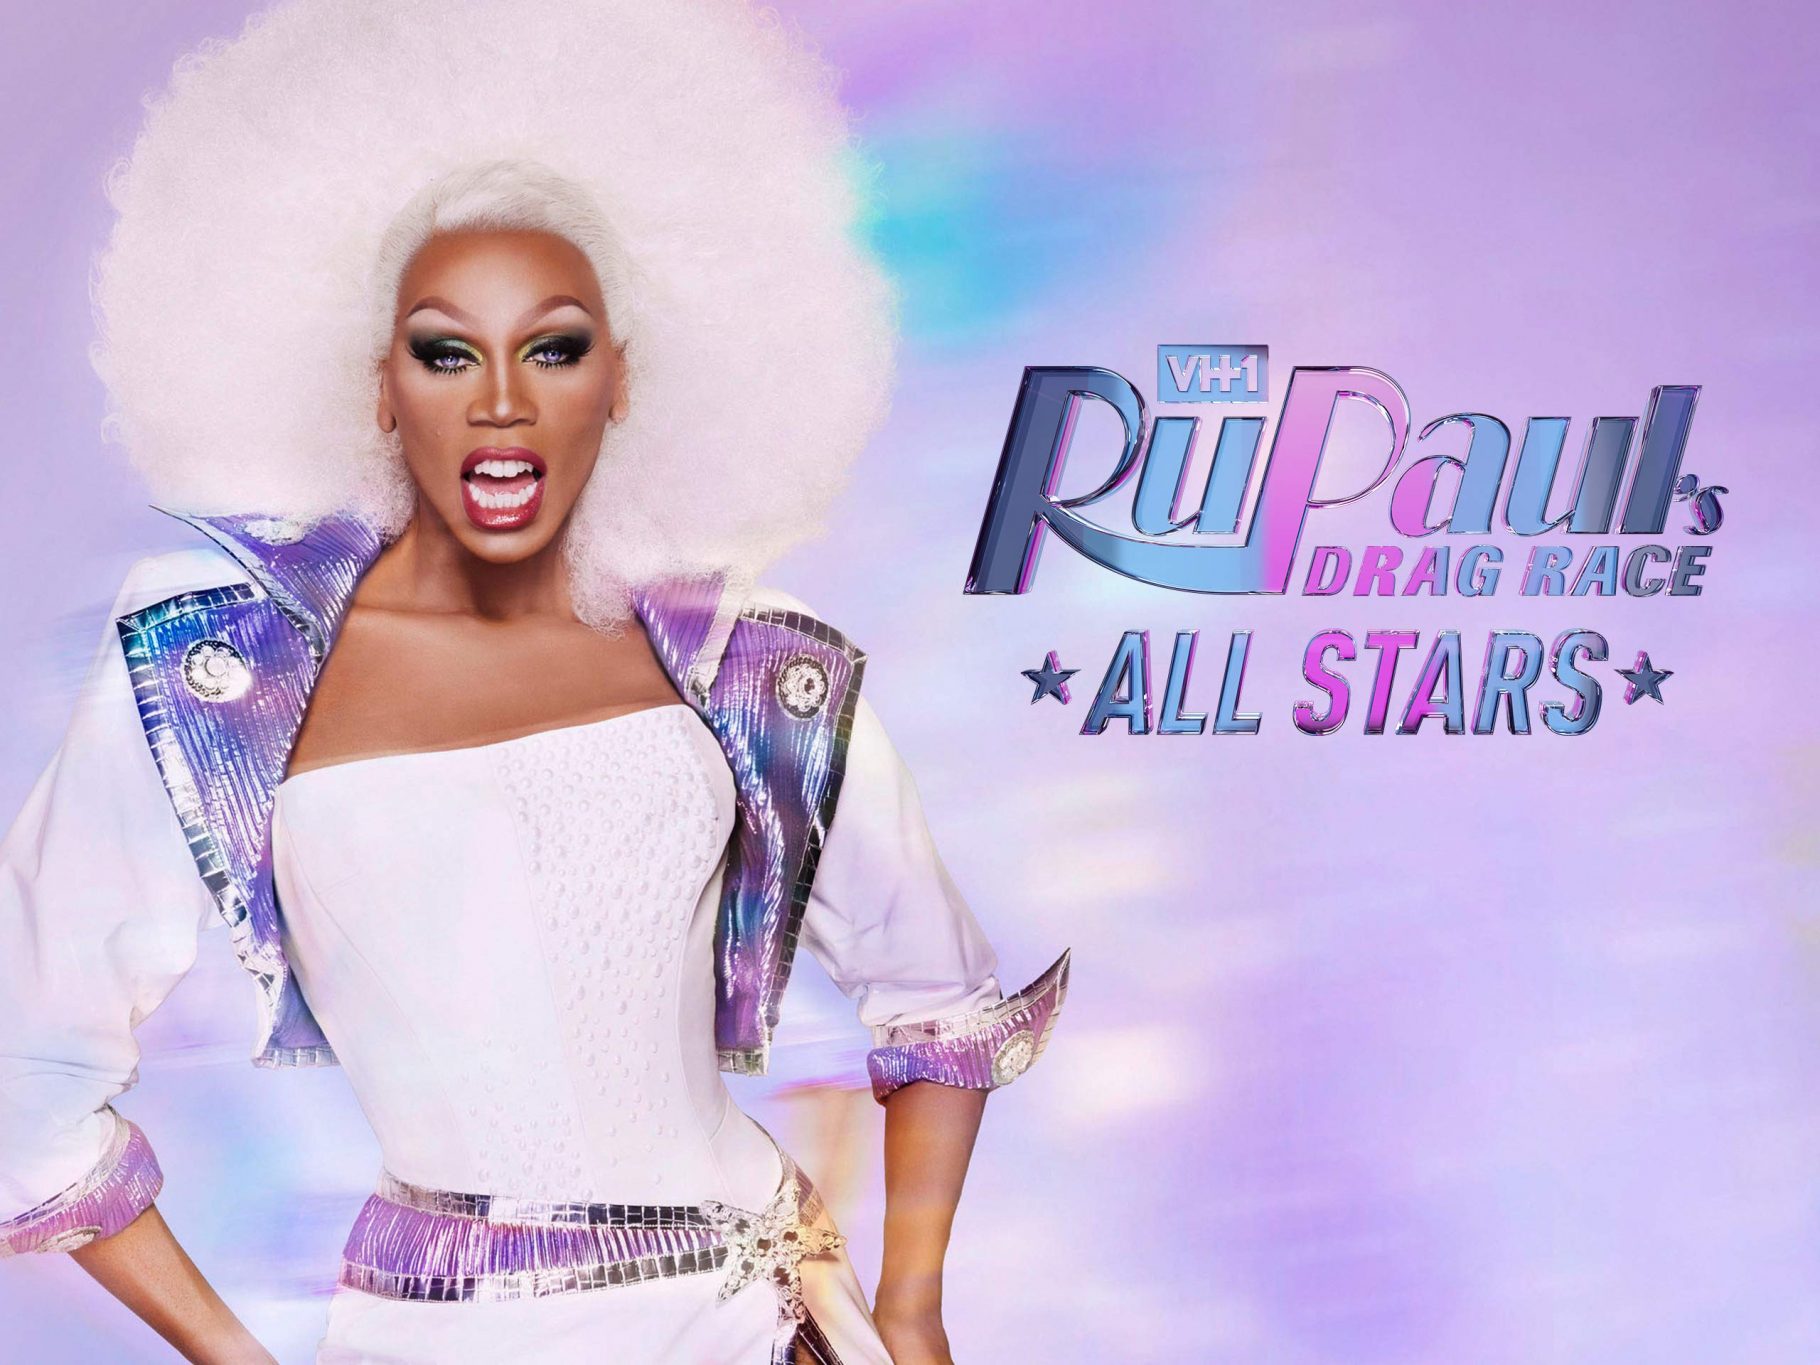 The GLAS Foundation organizes weekly screenings of RuPaul’s Drag Race All Stars 4